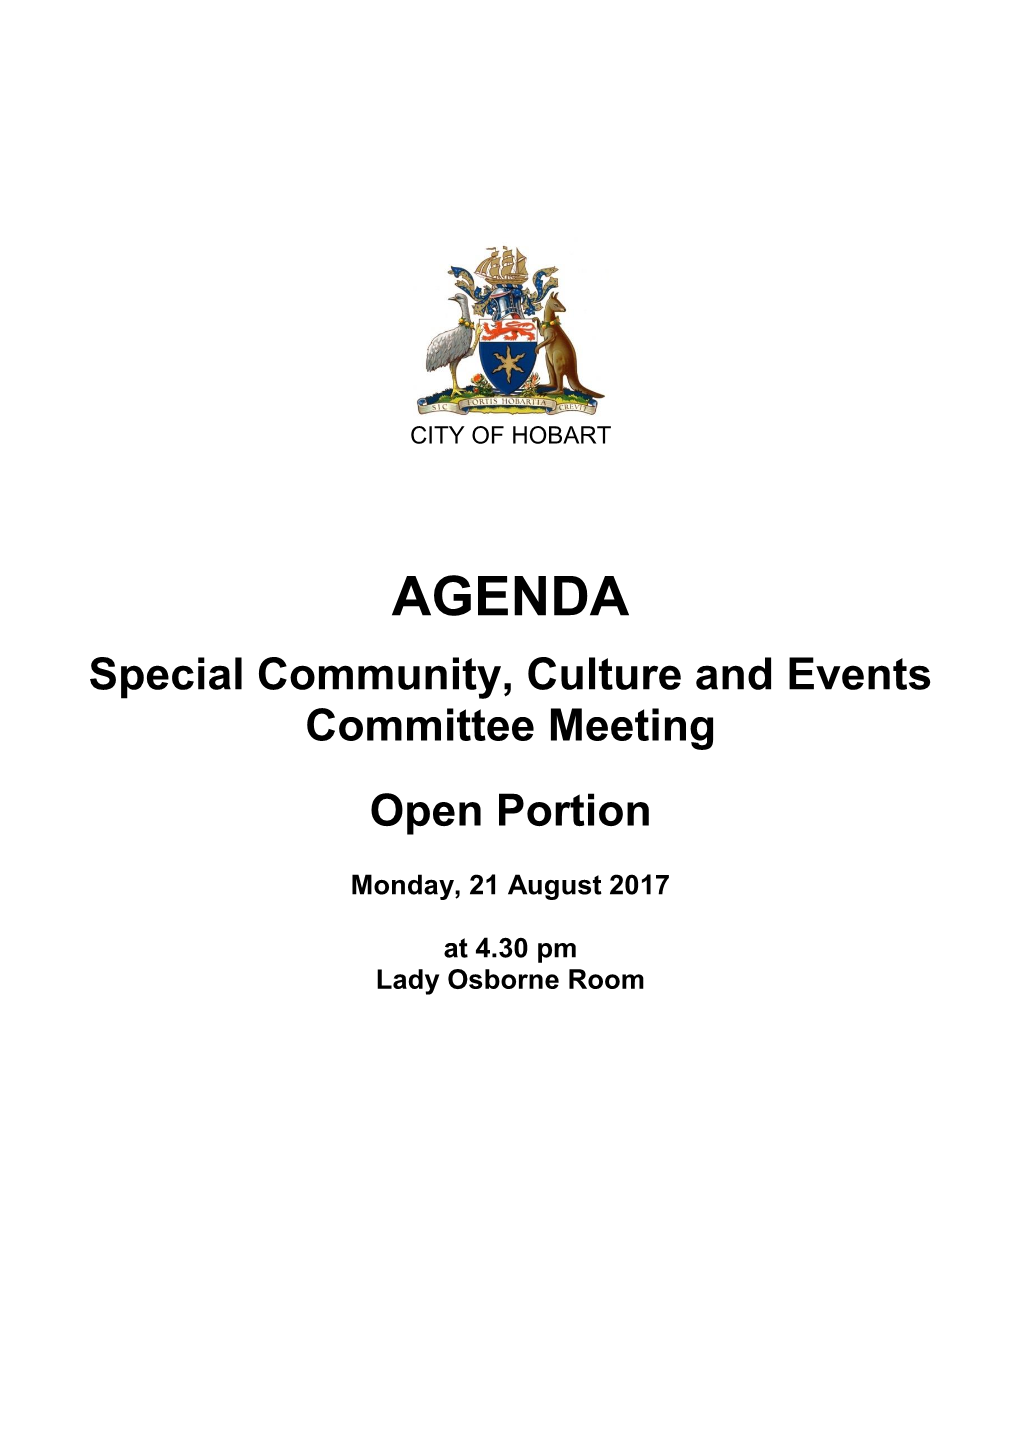 Agenda of Special Community, Culture and Events Committee